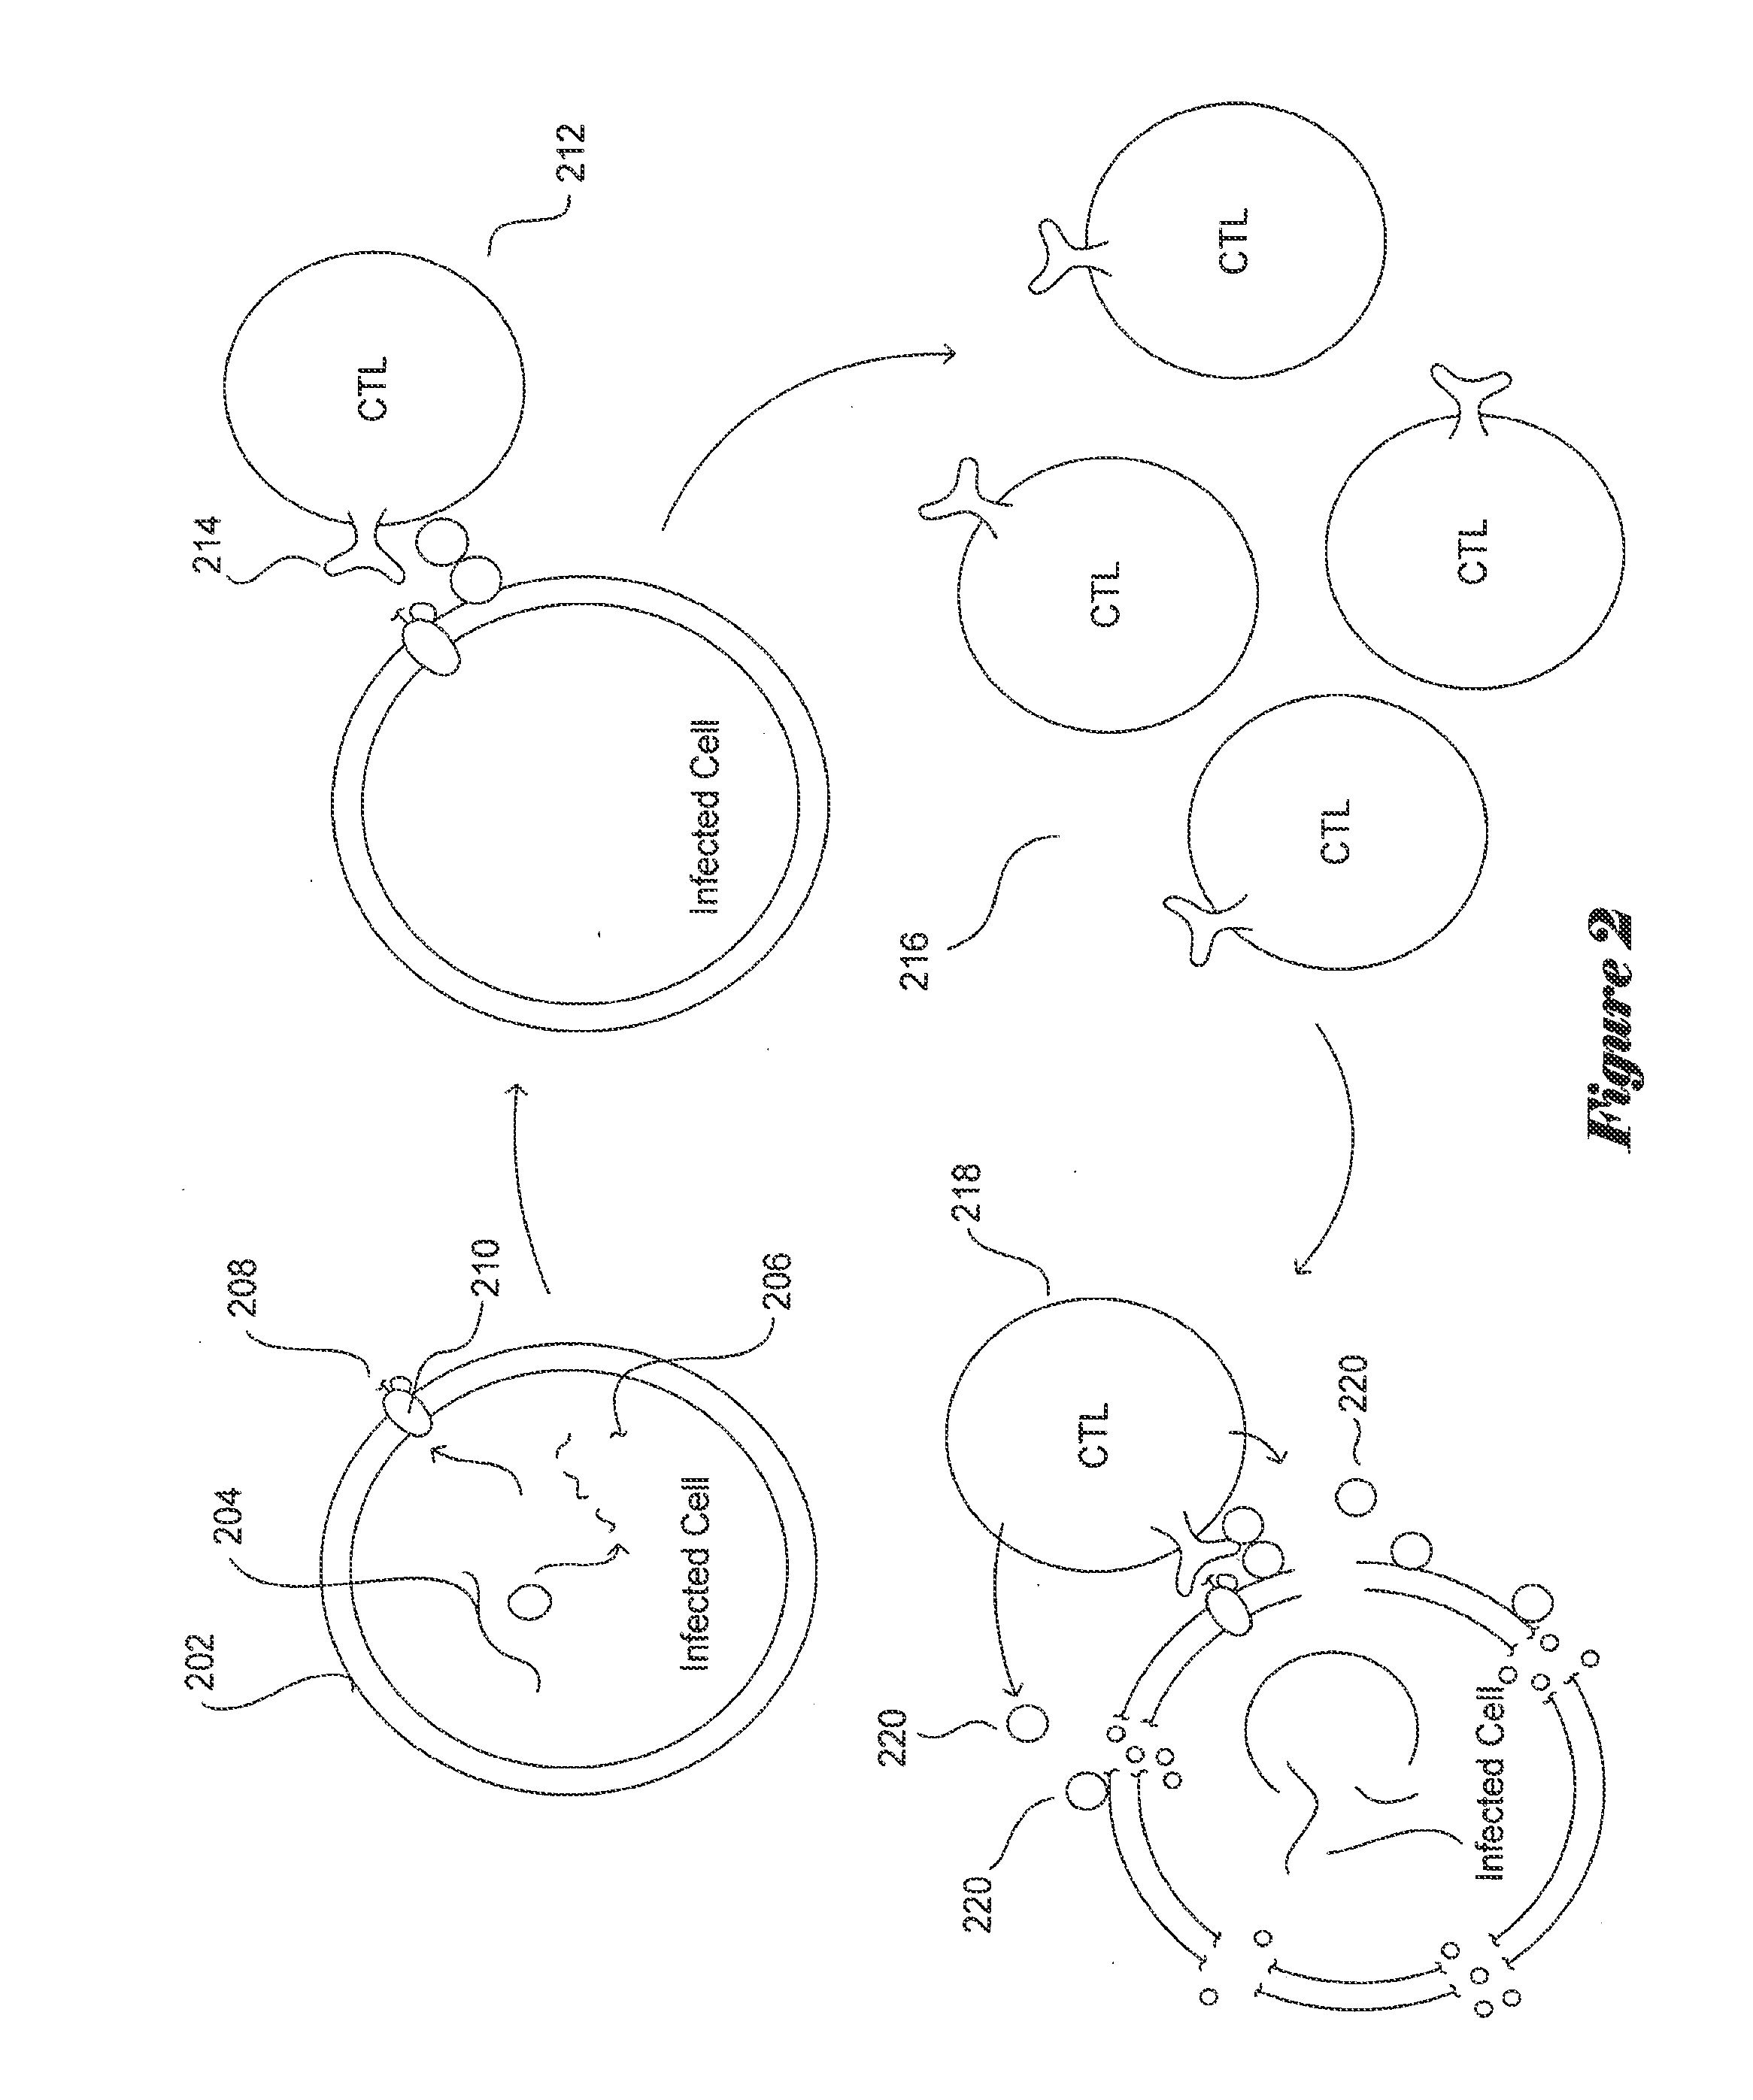 Conserved-Element Vaccines and Methods for Designing Conserved-Element Vaccines